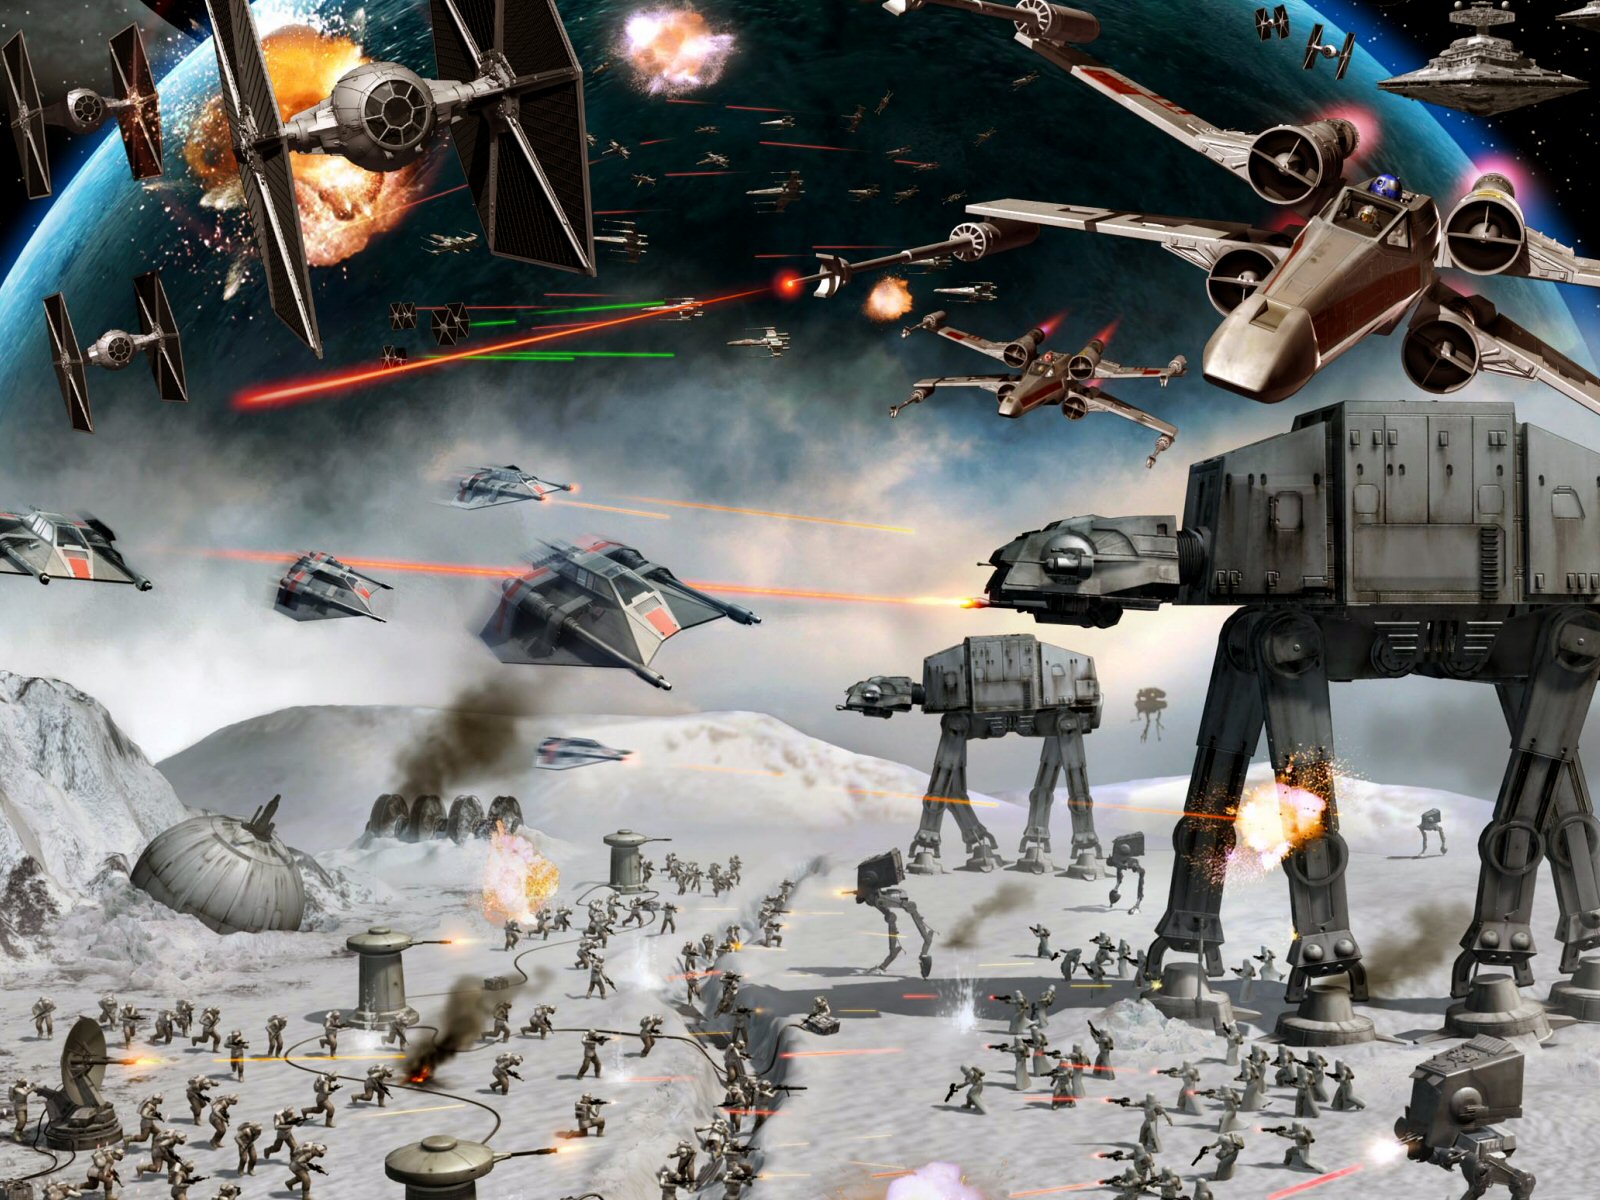 Published May 20 2009 at 1600 1200 in Star Wars Wallpaper Set 1